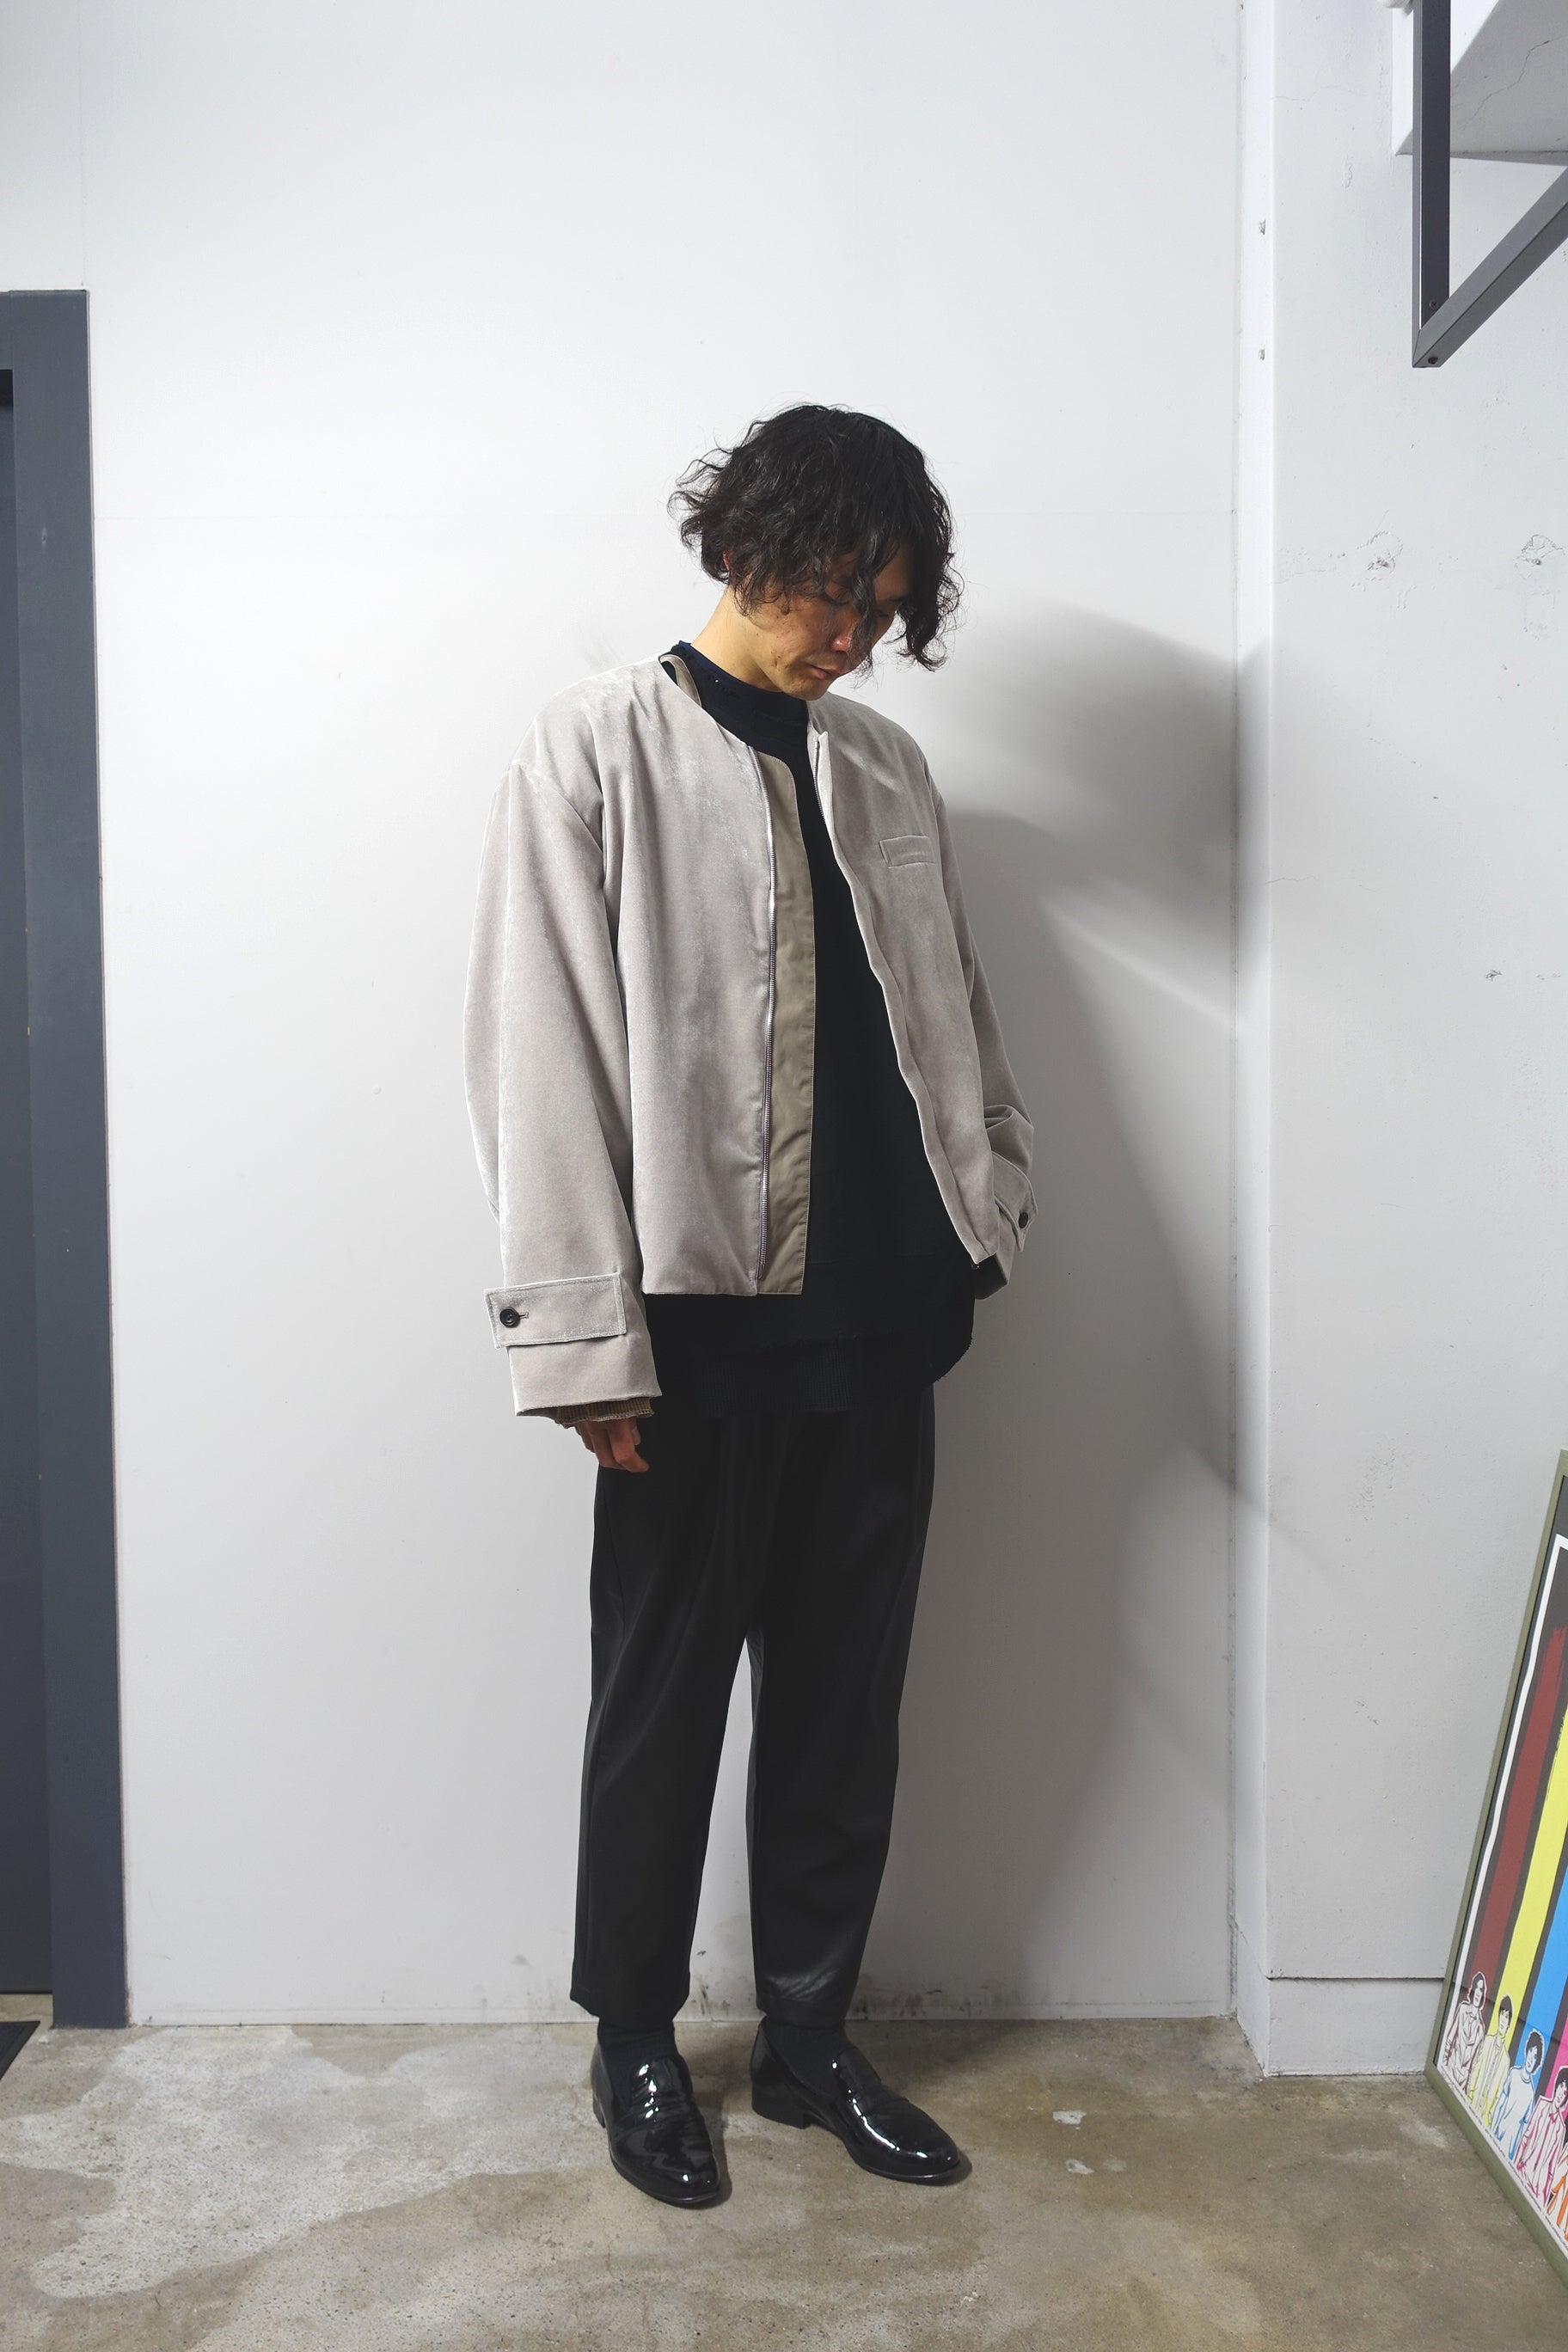 stein(シュタイン)/FAKE LEATHER TROUSERS/Black 通販 取り扱い-CONCRETE RIVER